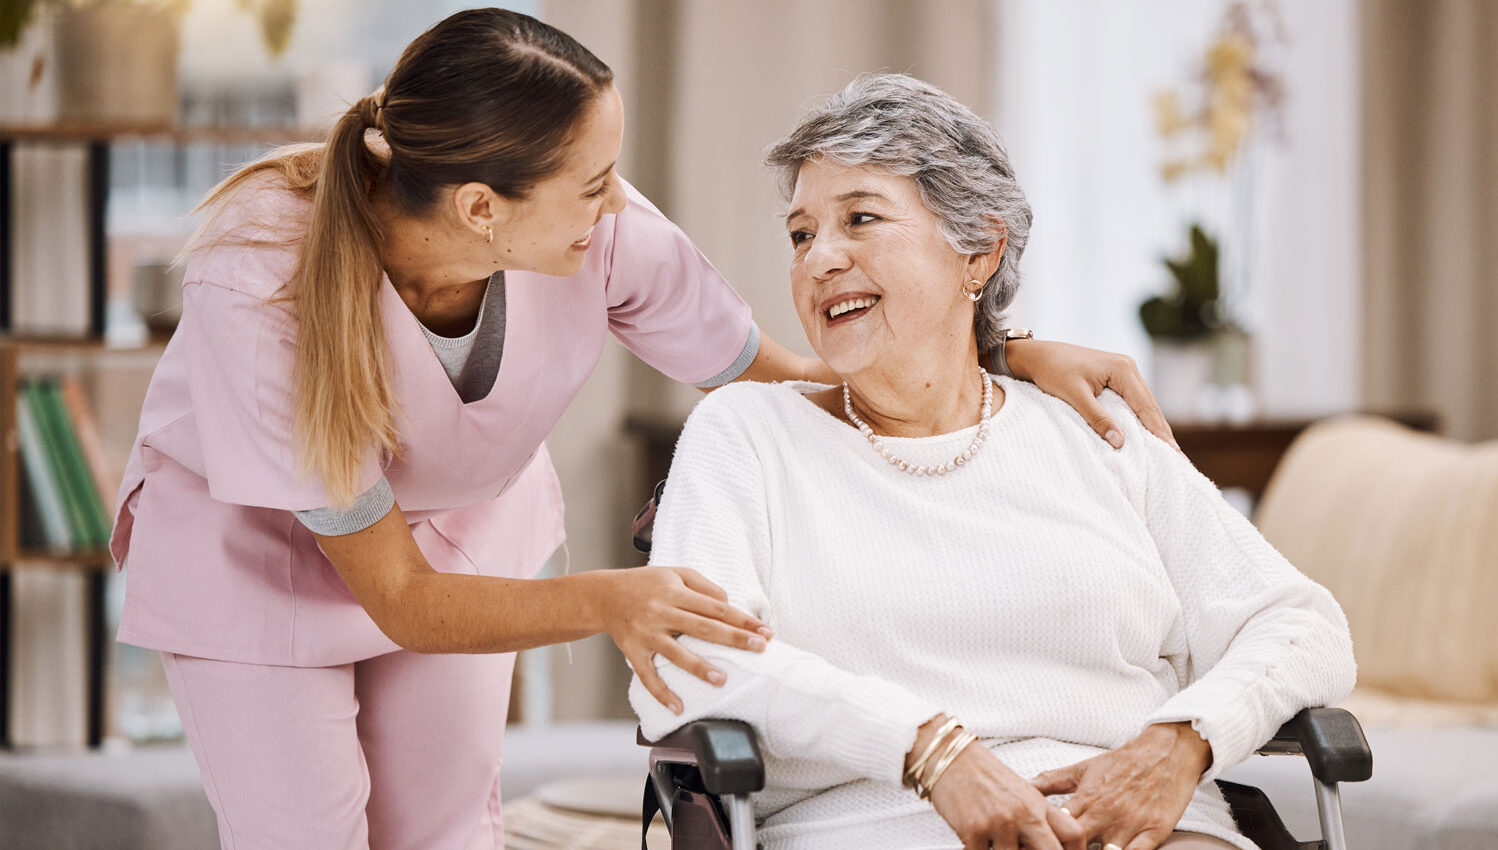 Home care nurse in pink scrubs assisting an elderly patient in a wheelchair